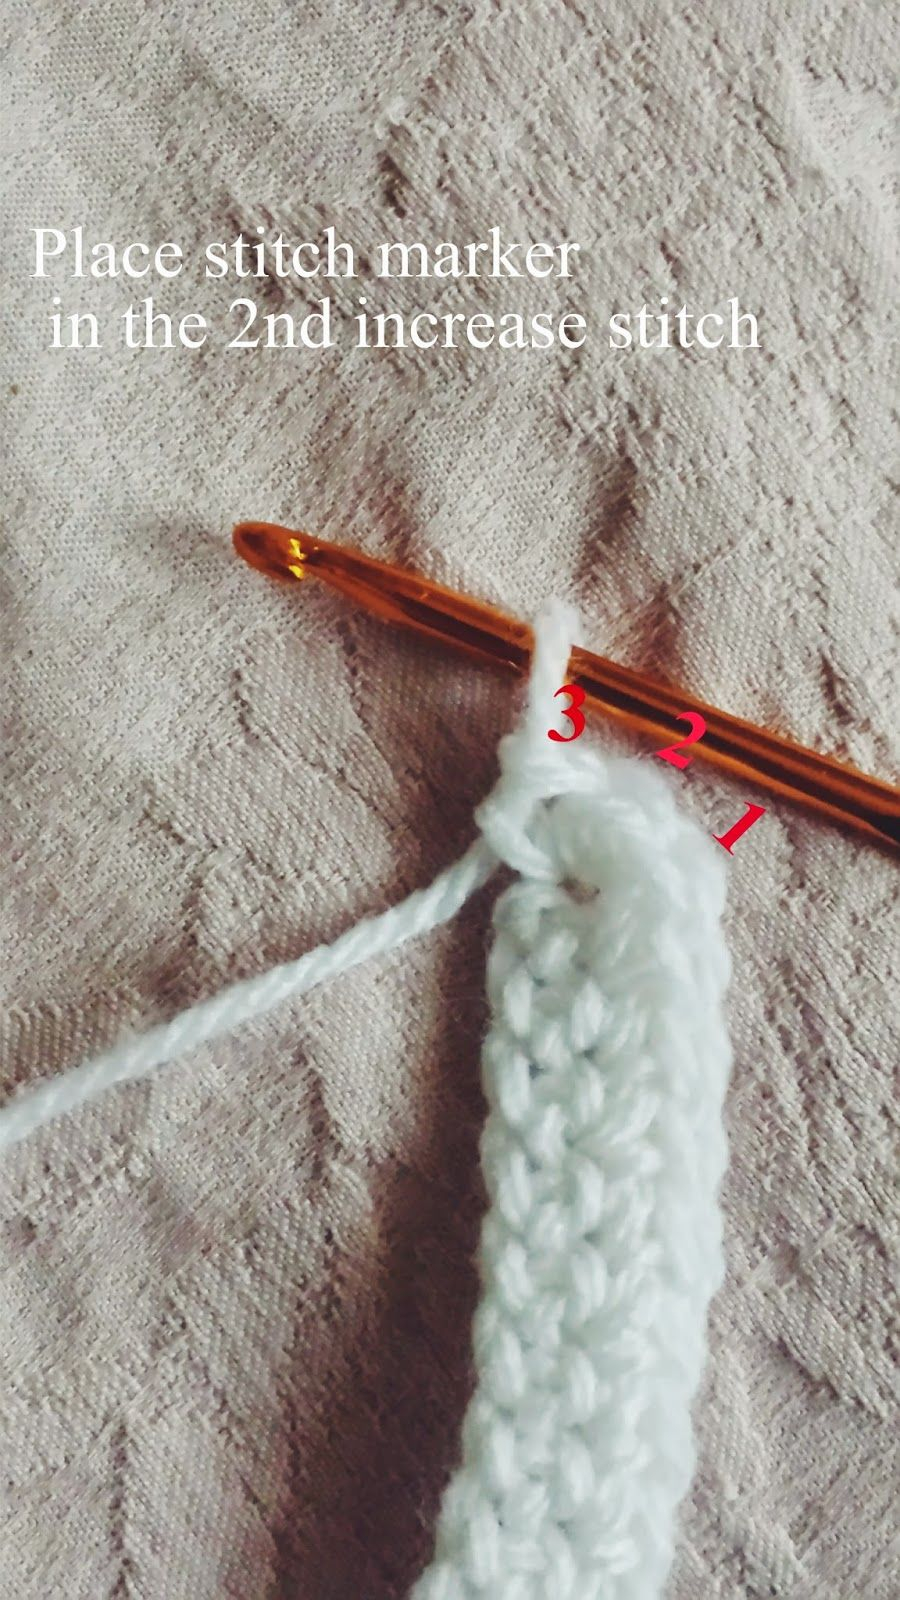 4Mm Crochet Hook Patterns What You Will Need 400 Mm Crochet Hook Yarn Compatible For Use